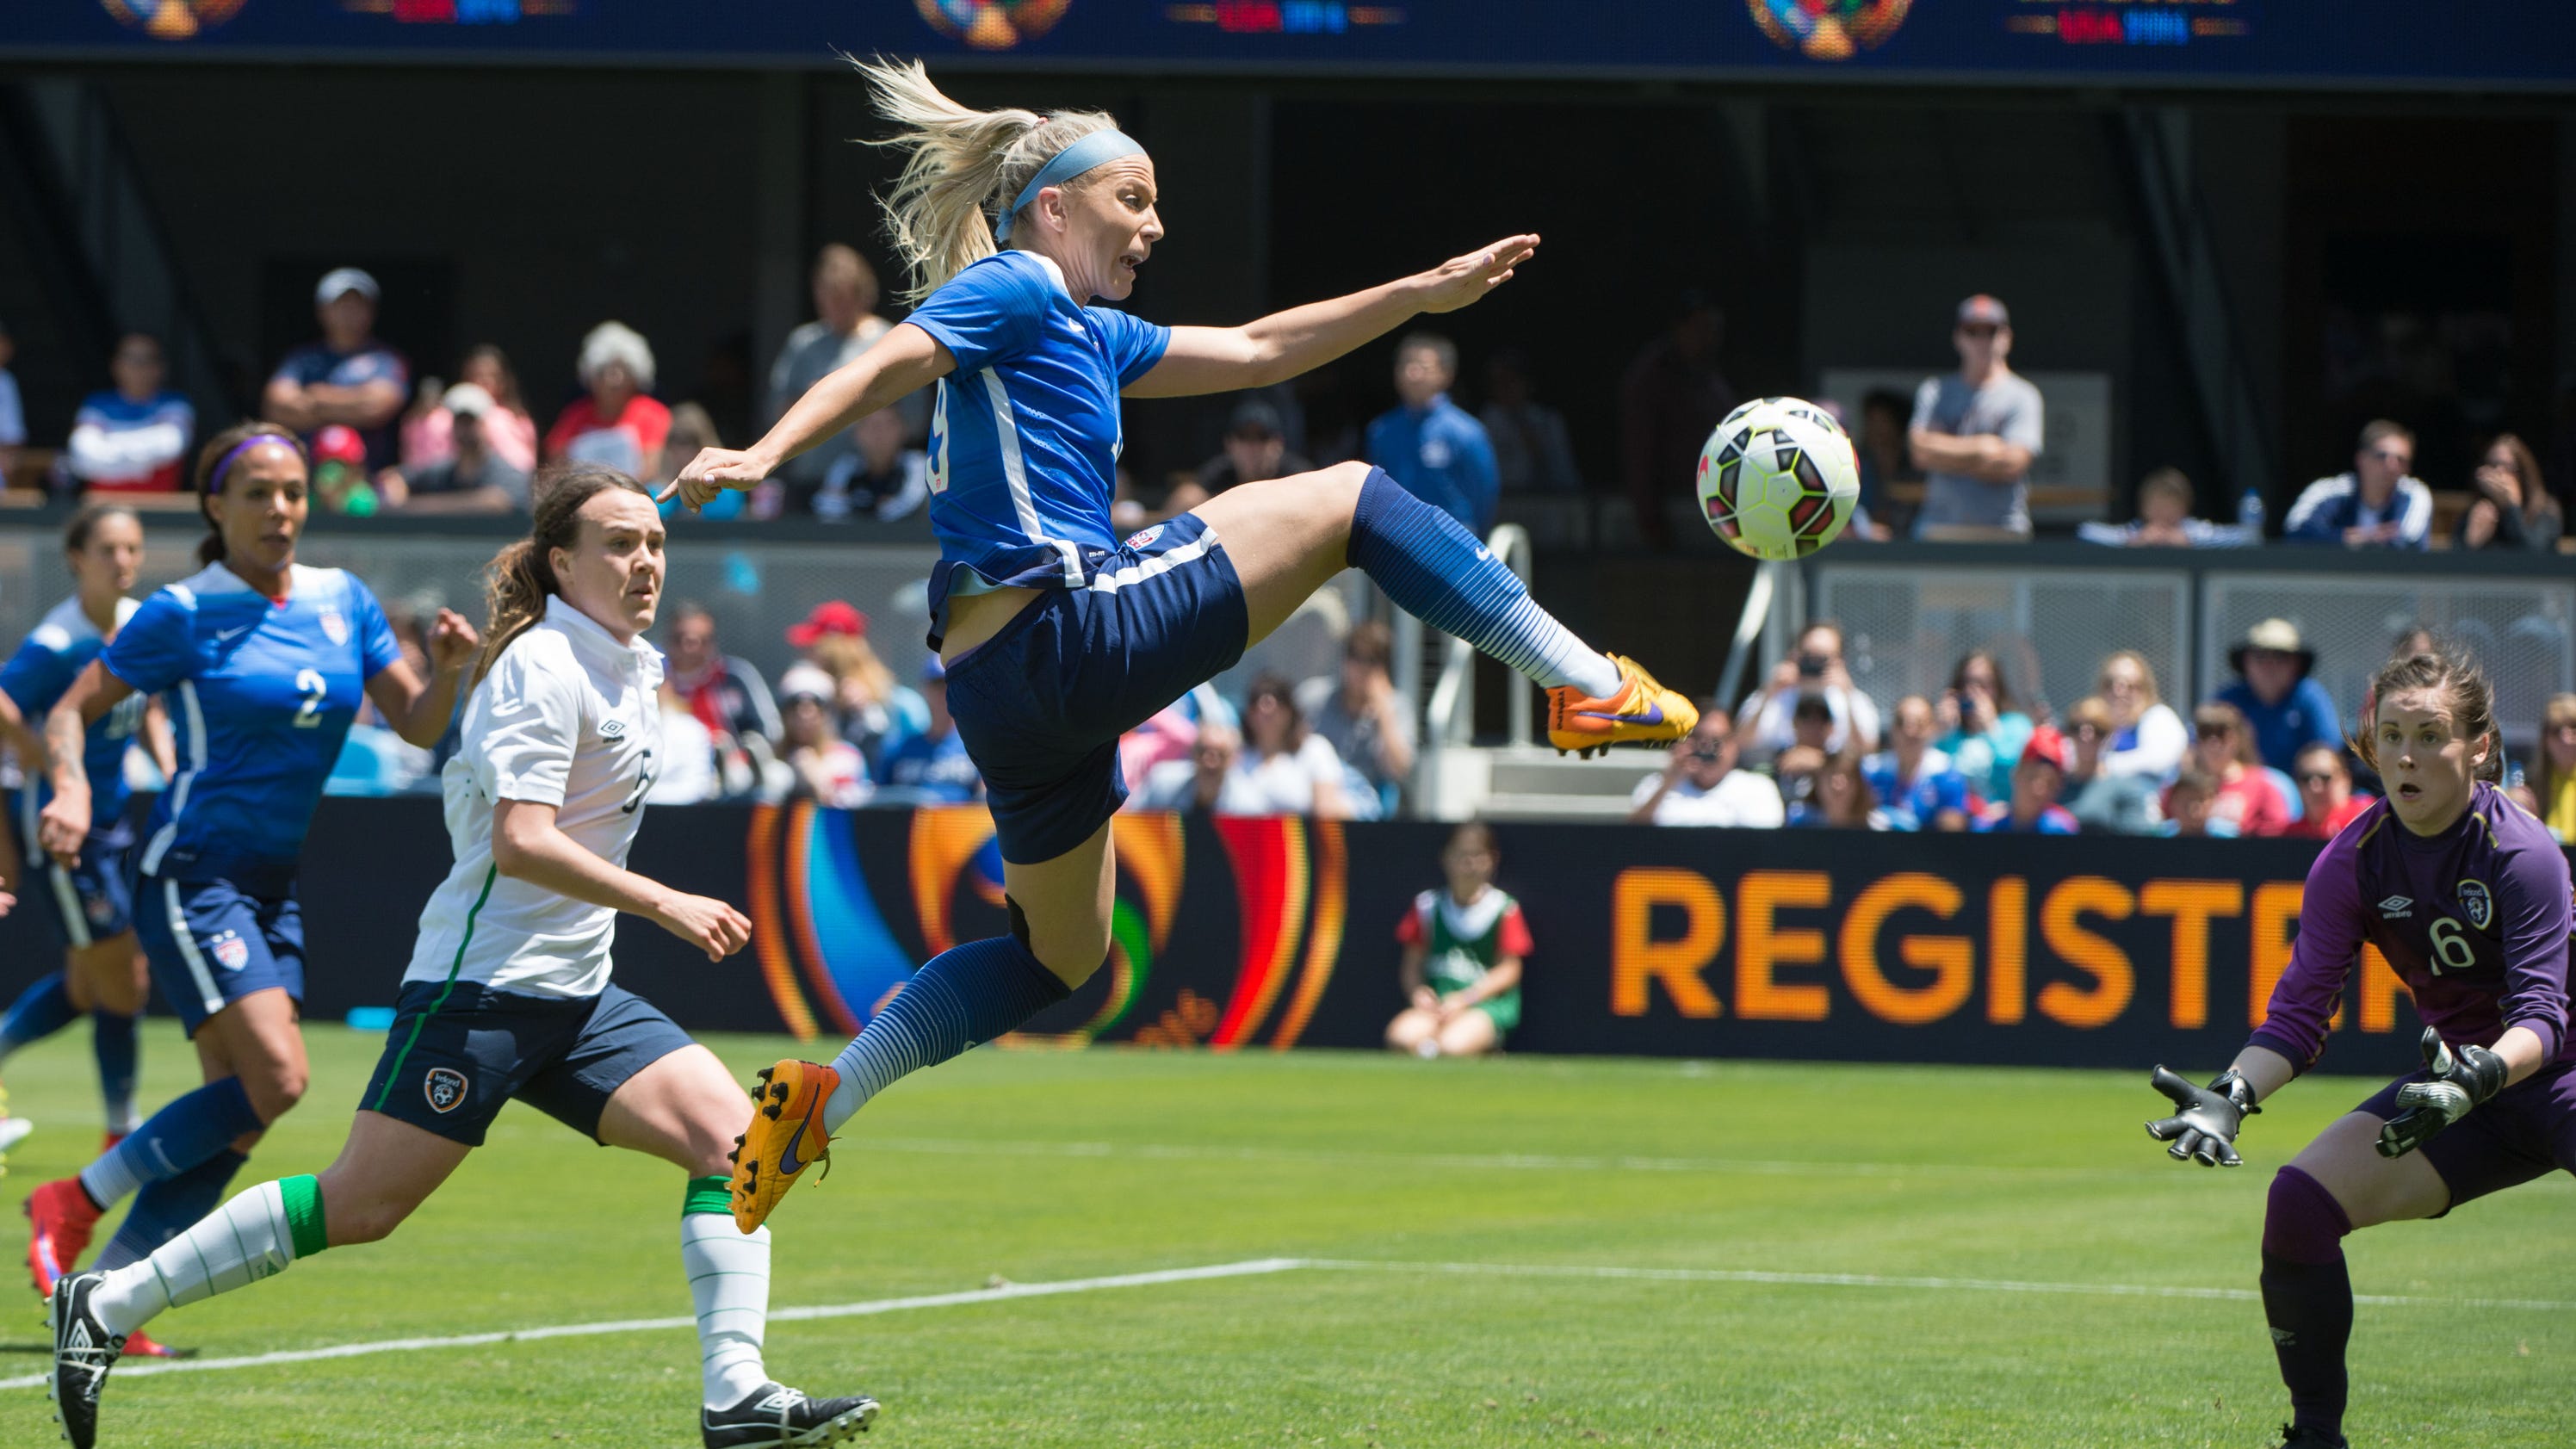 2015 FIFA Women's World Cup: U.S schedule and roster